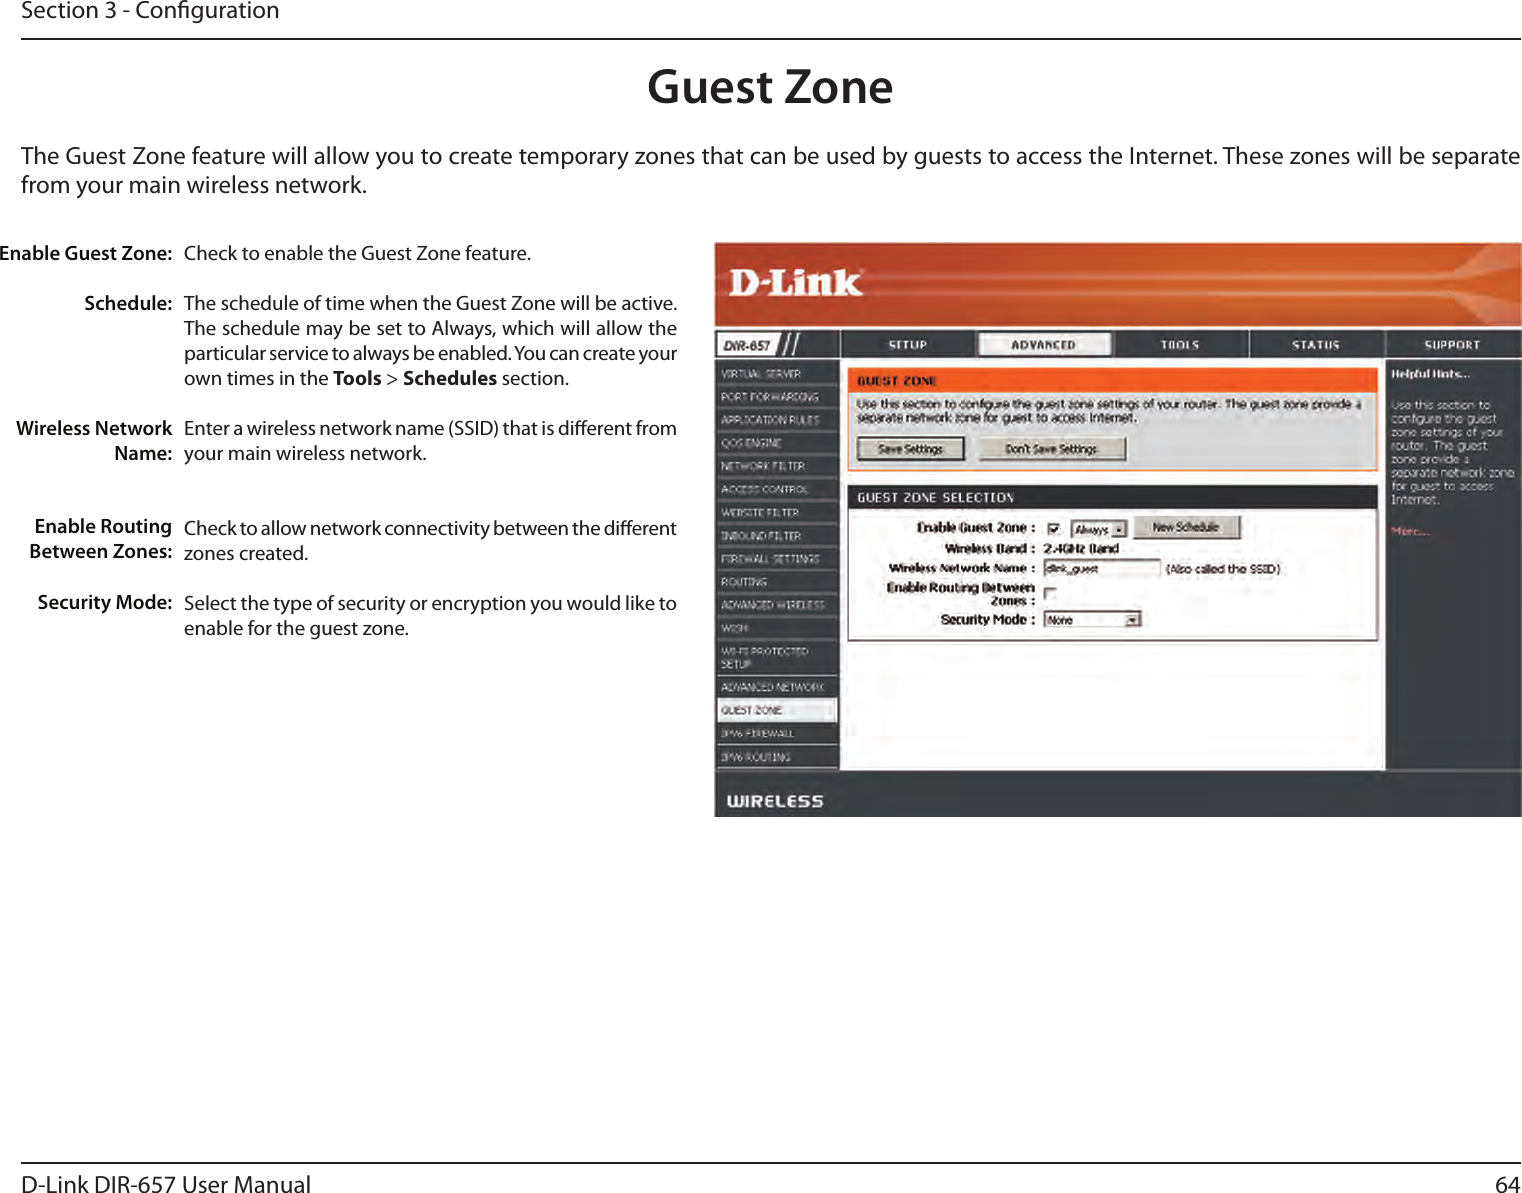 64D-Link DIR-657 User ManualSection 3 - CongurationGuest ZoneCheck to enable the Guest Zone feature. The schedule of time when the Guest Zone will be active. The schedule may be set to Always, which will allow the particular service to always be enabled. You can create your own times in the Tools &gt; Schedules section.Enter a wireless network name (SSID) that is dierent from your main wireless network.Check to allow network connectivity between the dierent zones created. Select the type of security or encryption you would like to enable for the guest zone.  Enable Guest Zone:Schedule:Wireless Network Name:Enable Routing Between Zones:Security Mode:The Guest Zone feature will allow you to create temporary zones that can be used by guests to access the Internet. These zones will be separate from your main wireless network. 